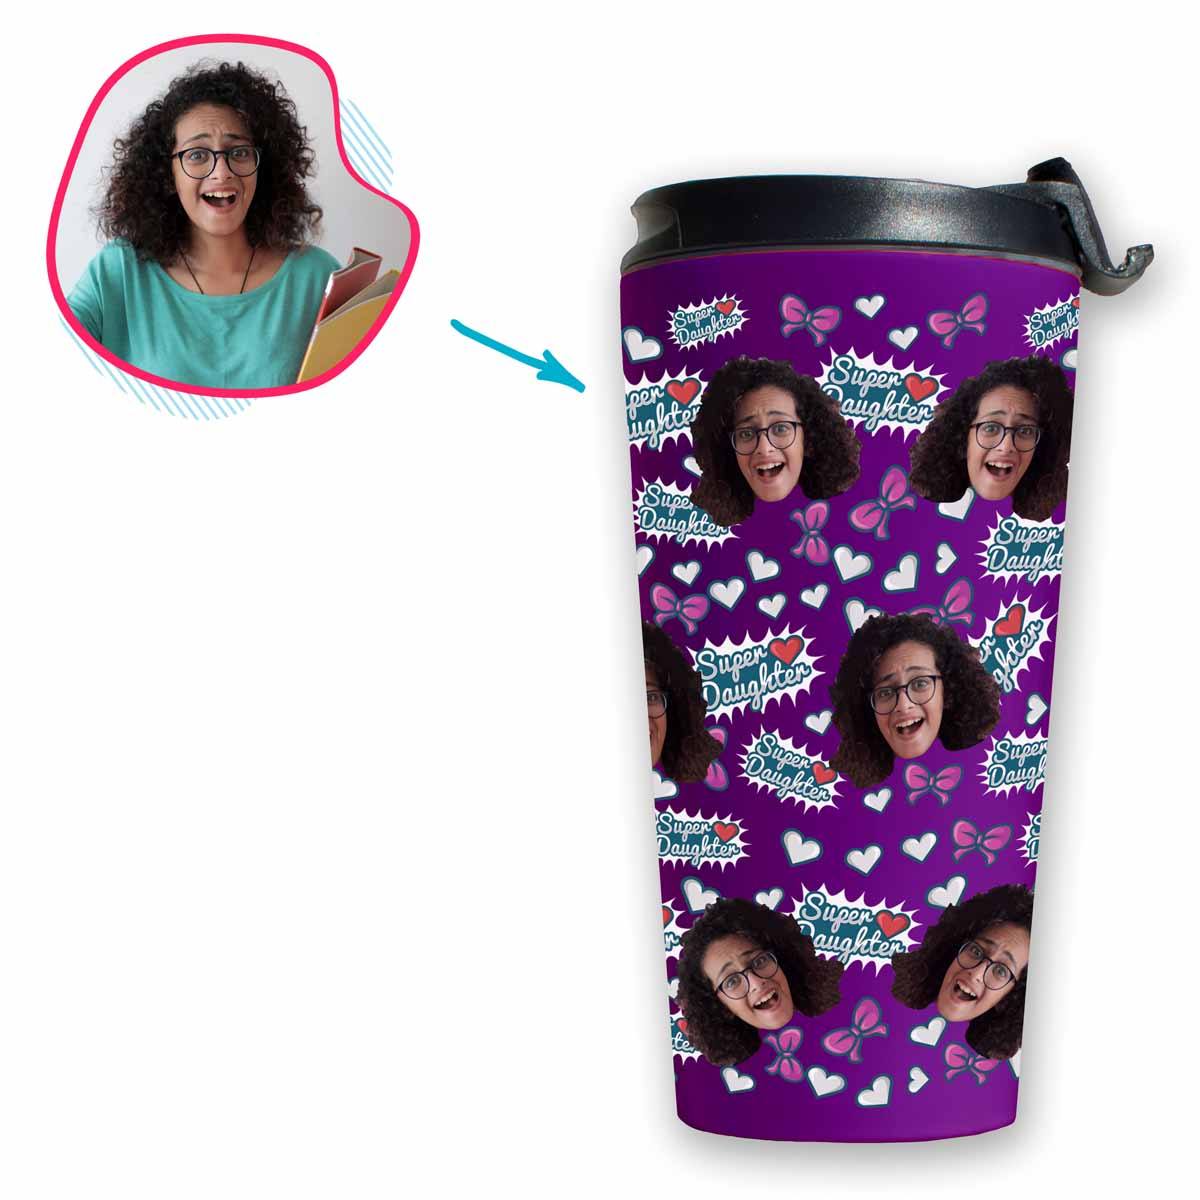 purple Super Daughter travel mug personalized with photo of face printed on it